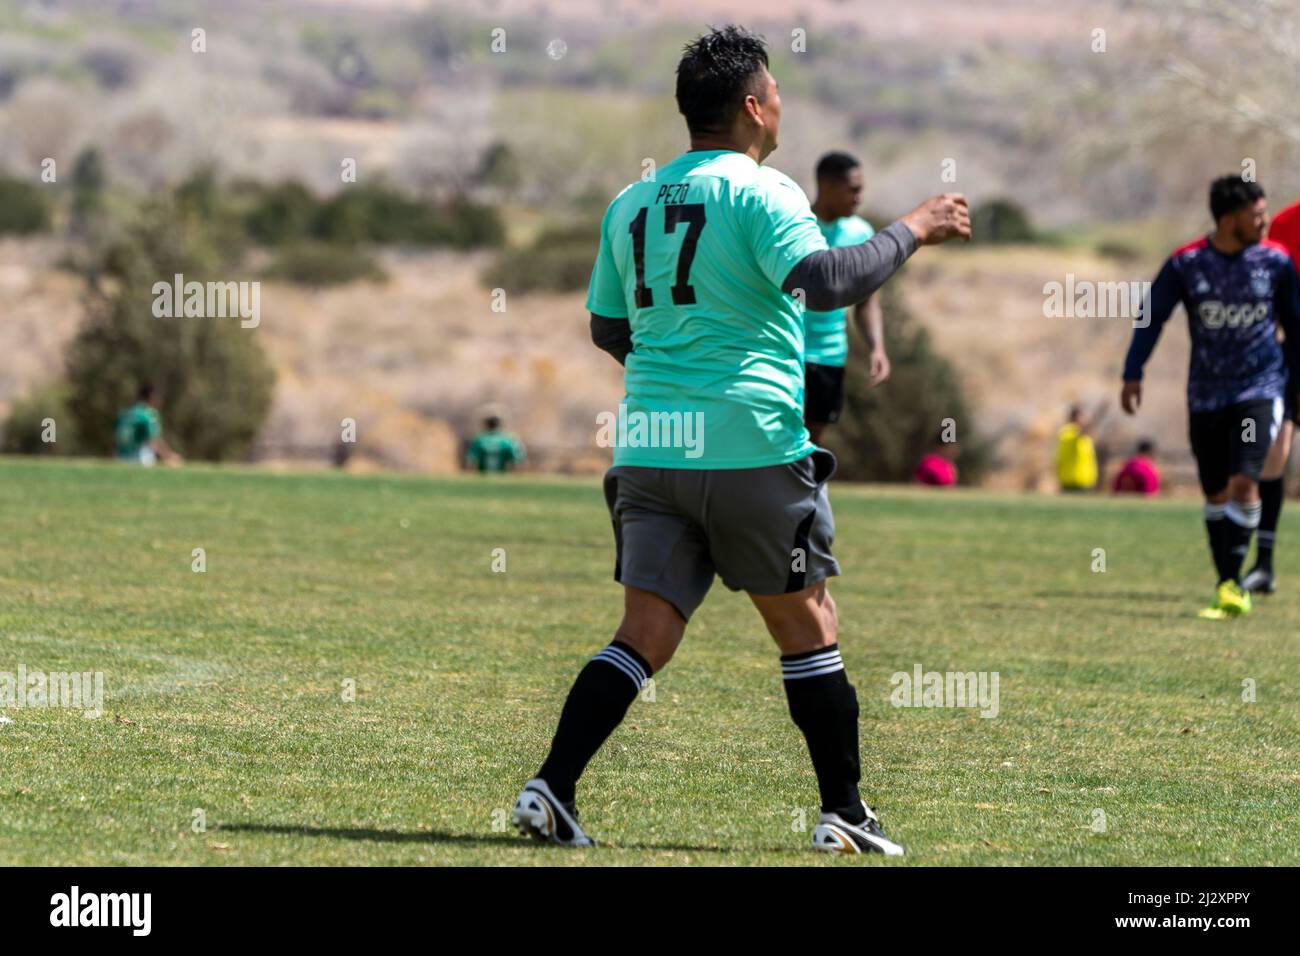 Playing soccer in Bernalillo, New Mexico Stock Photo